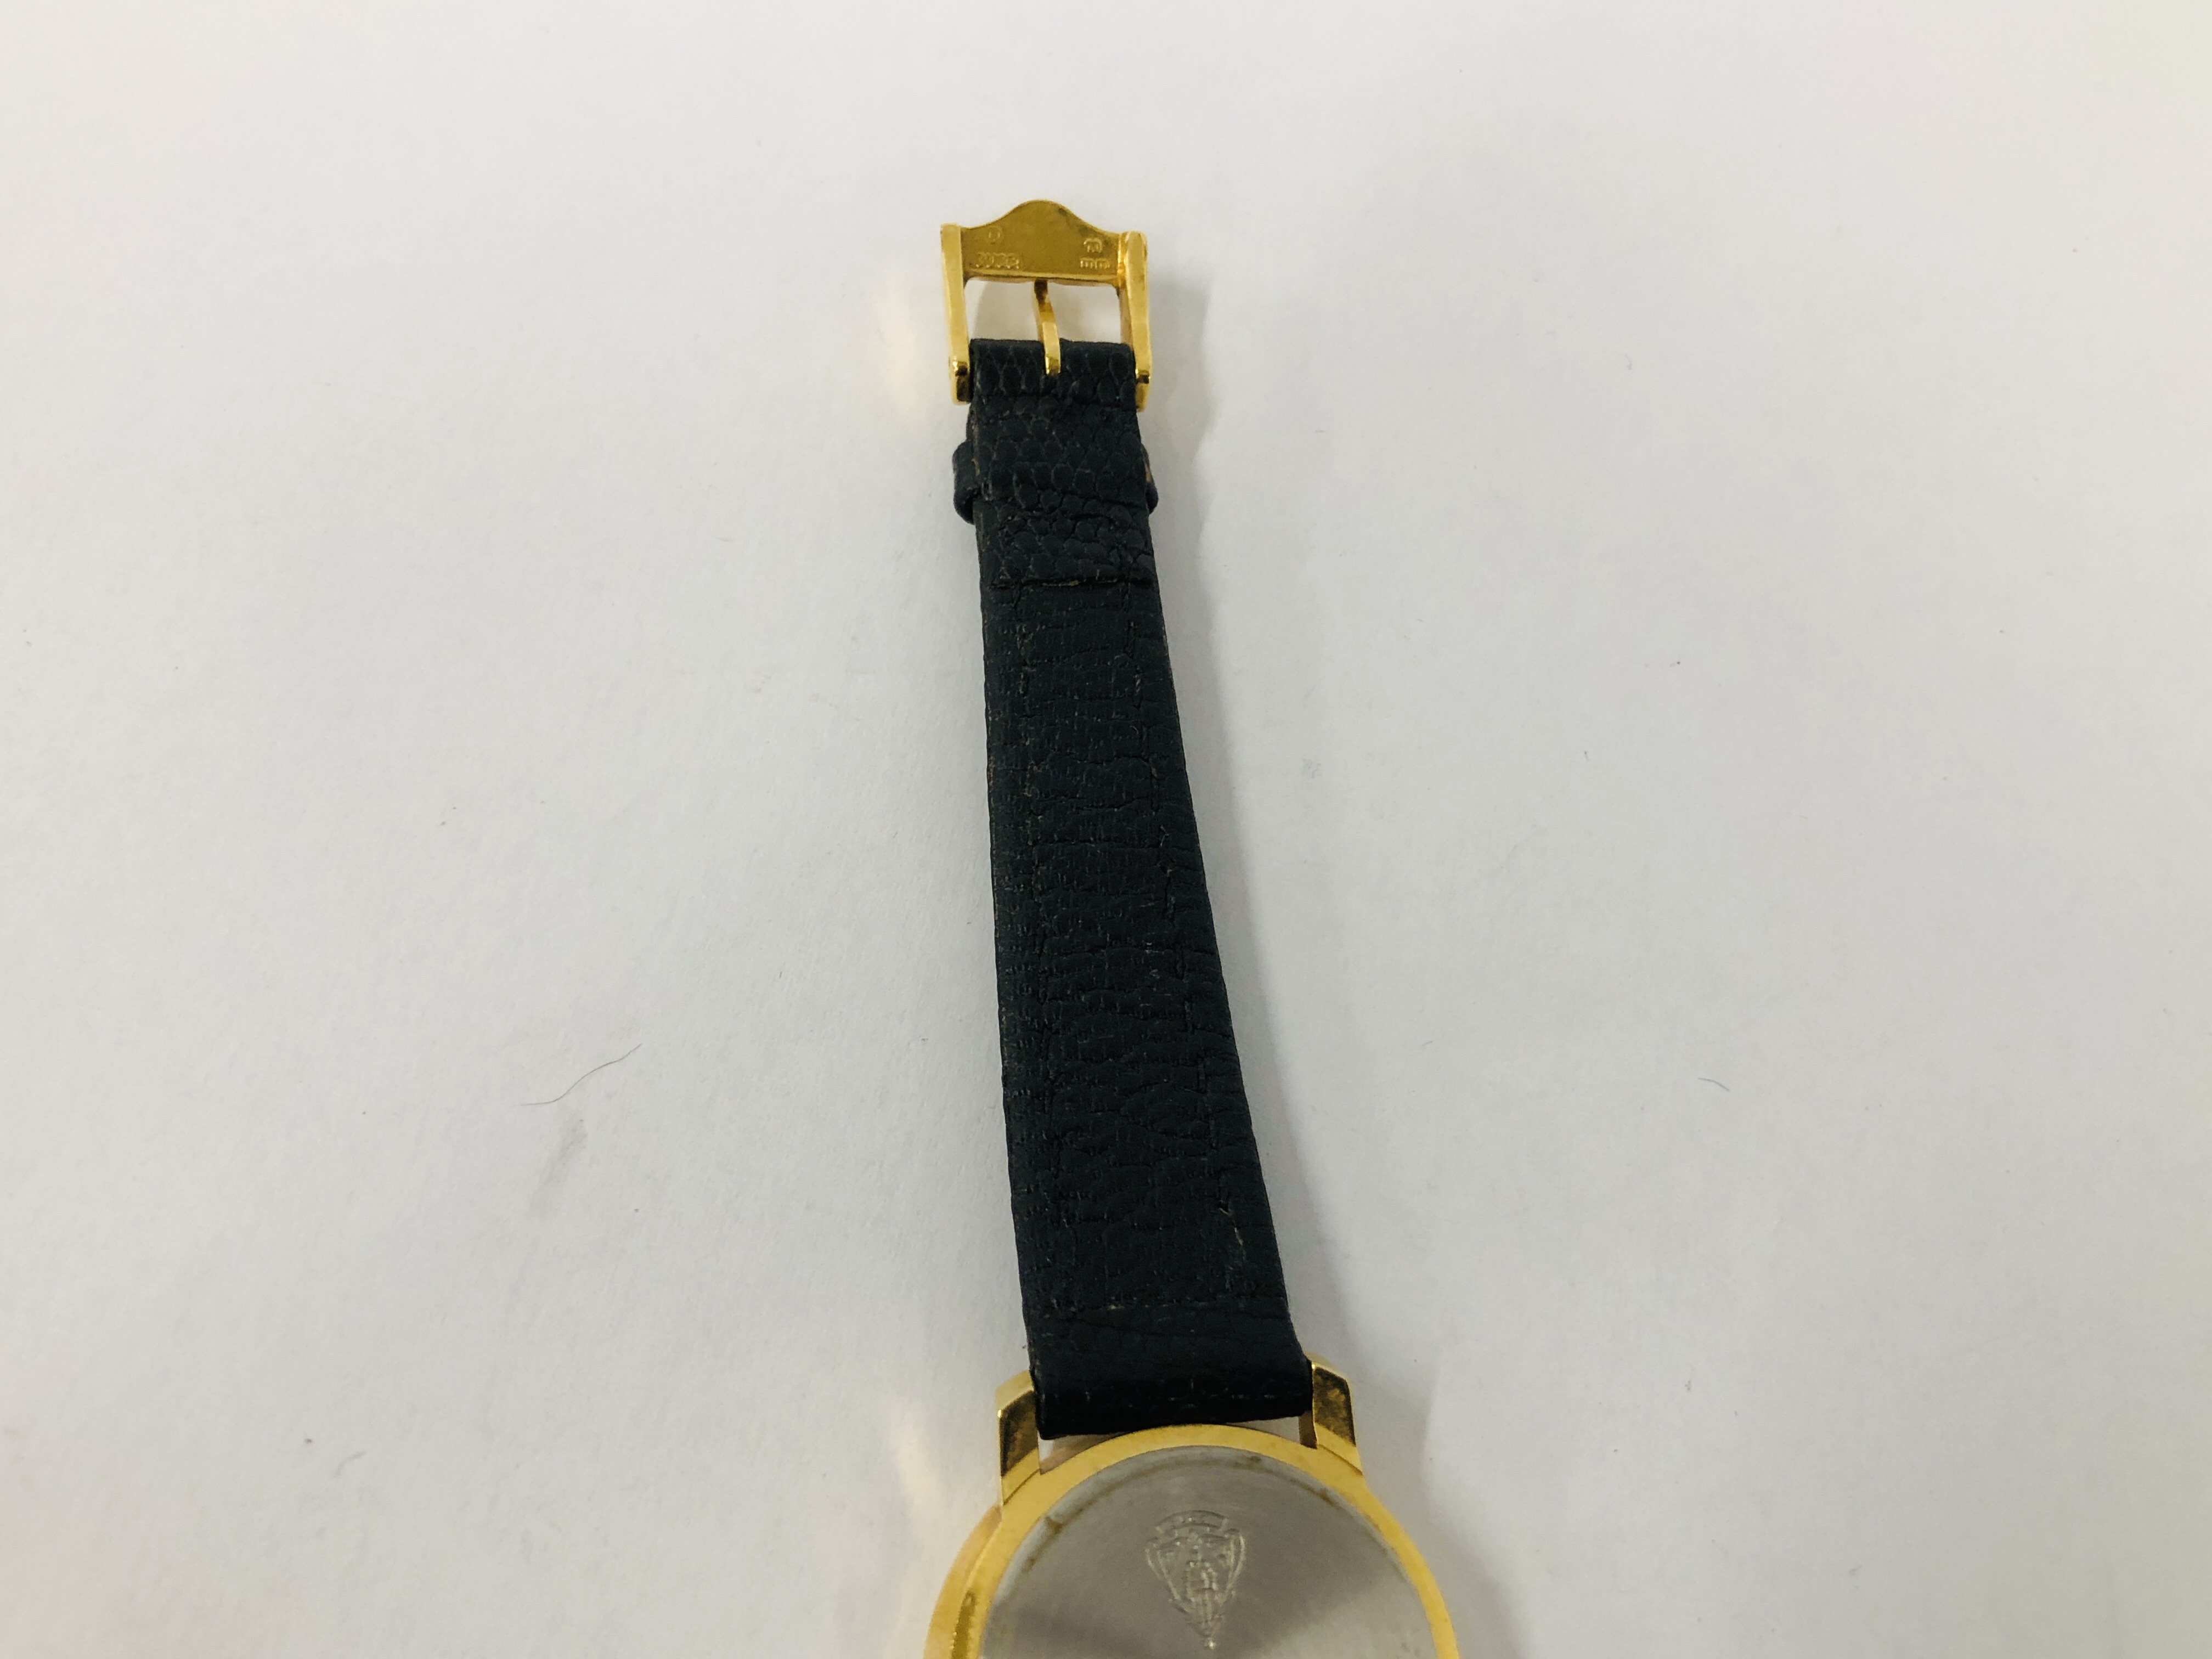 LADIES WRIST WATCH MARKED GUCCI MODEL NO. 2200L SERIAL NO. - Image 10 of 16